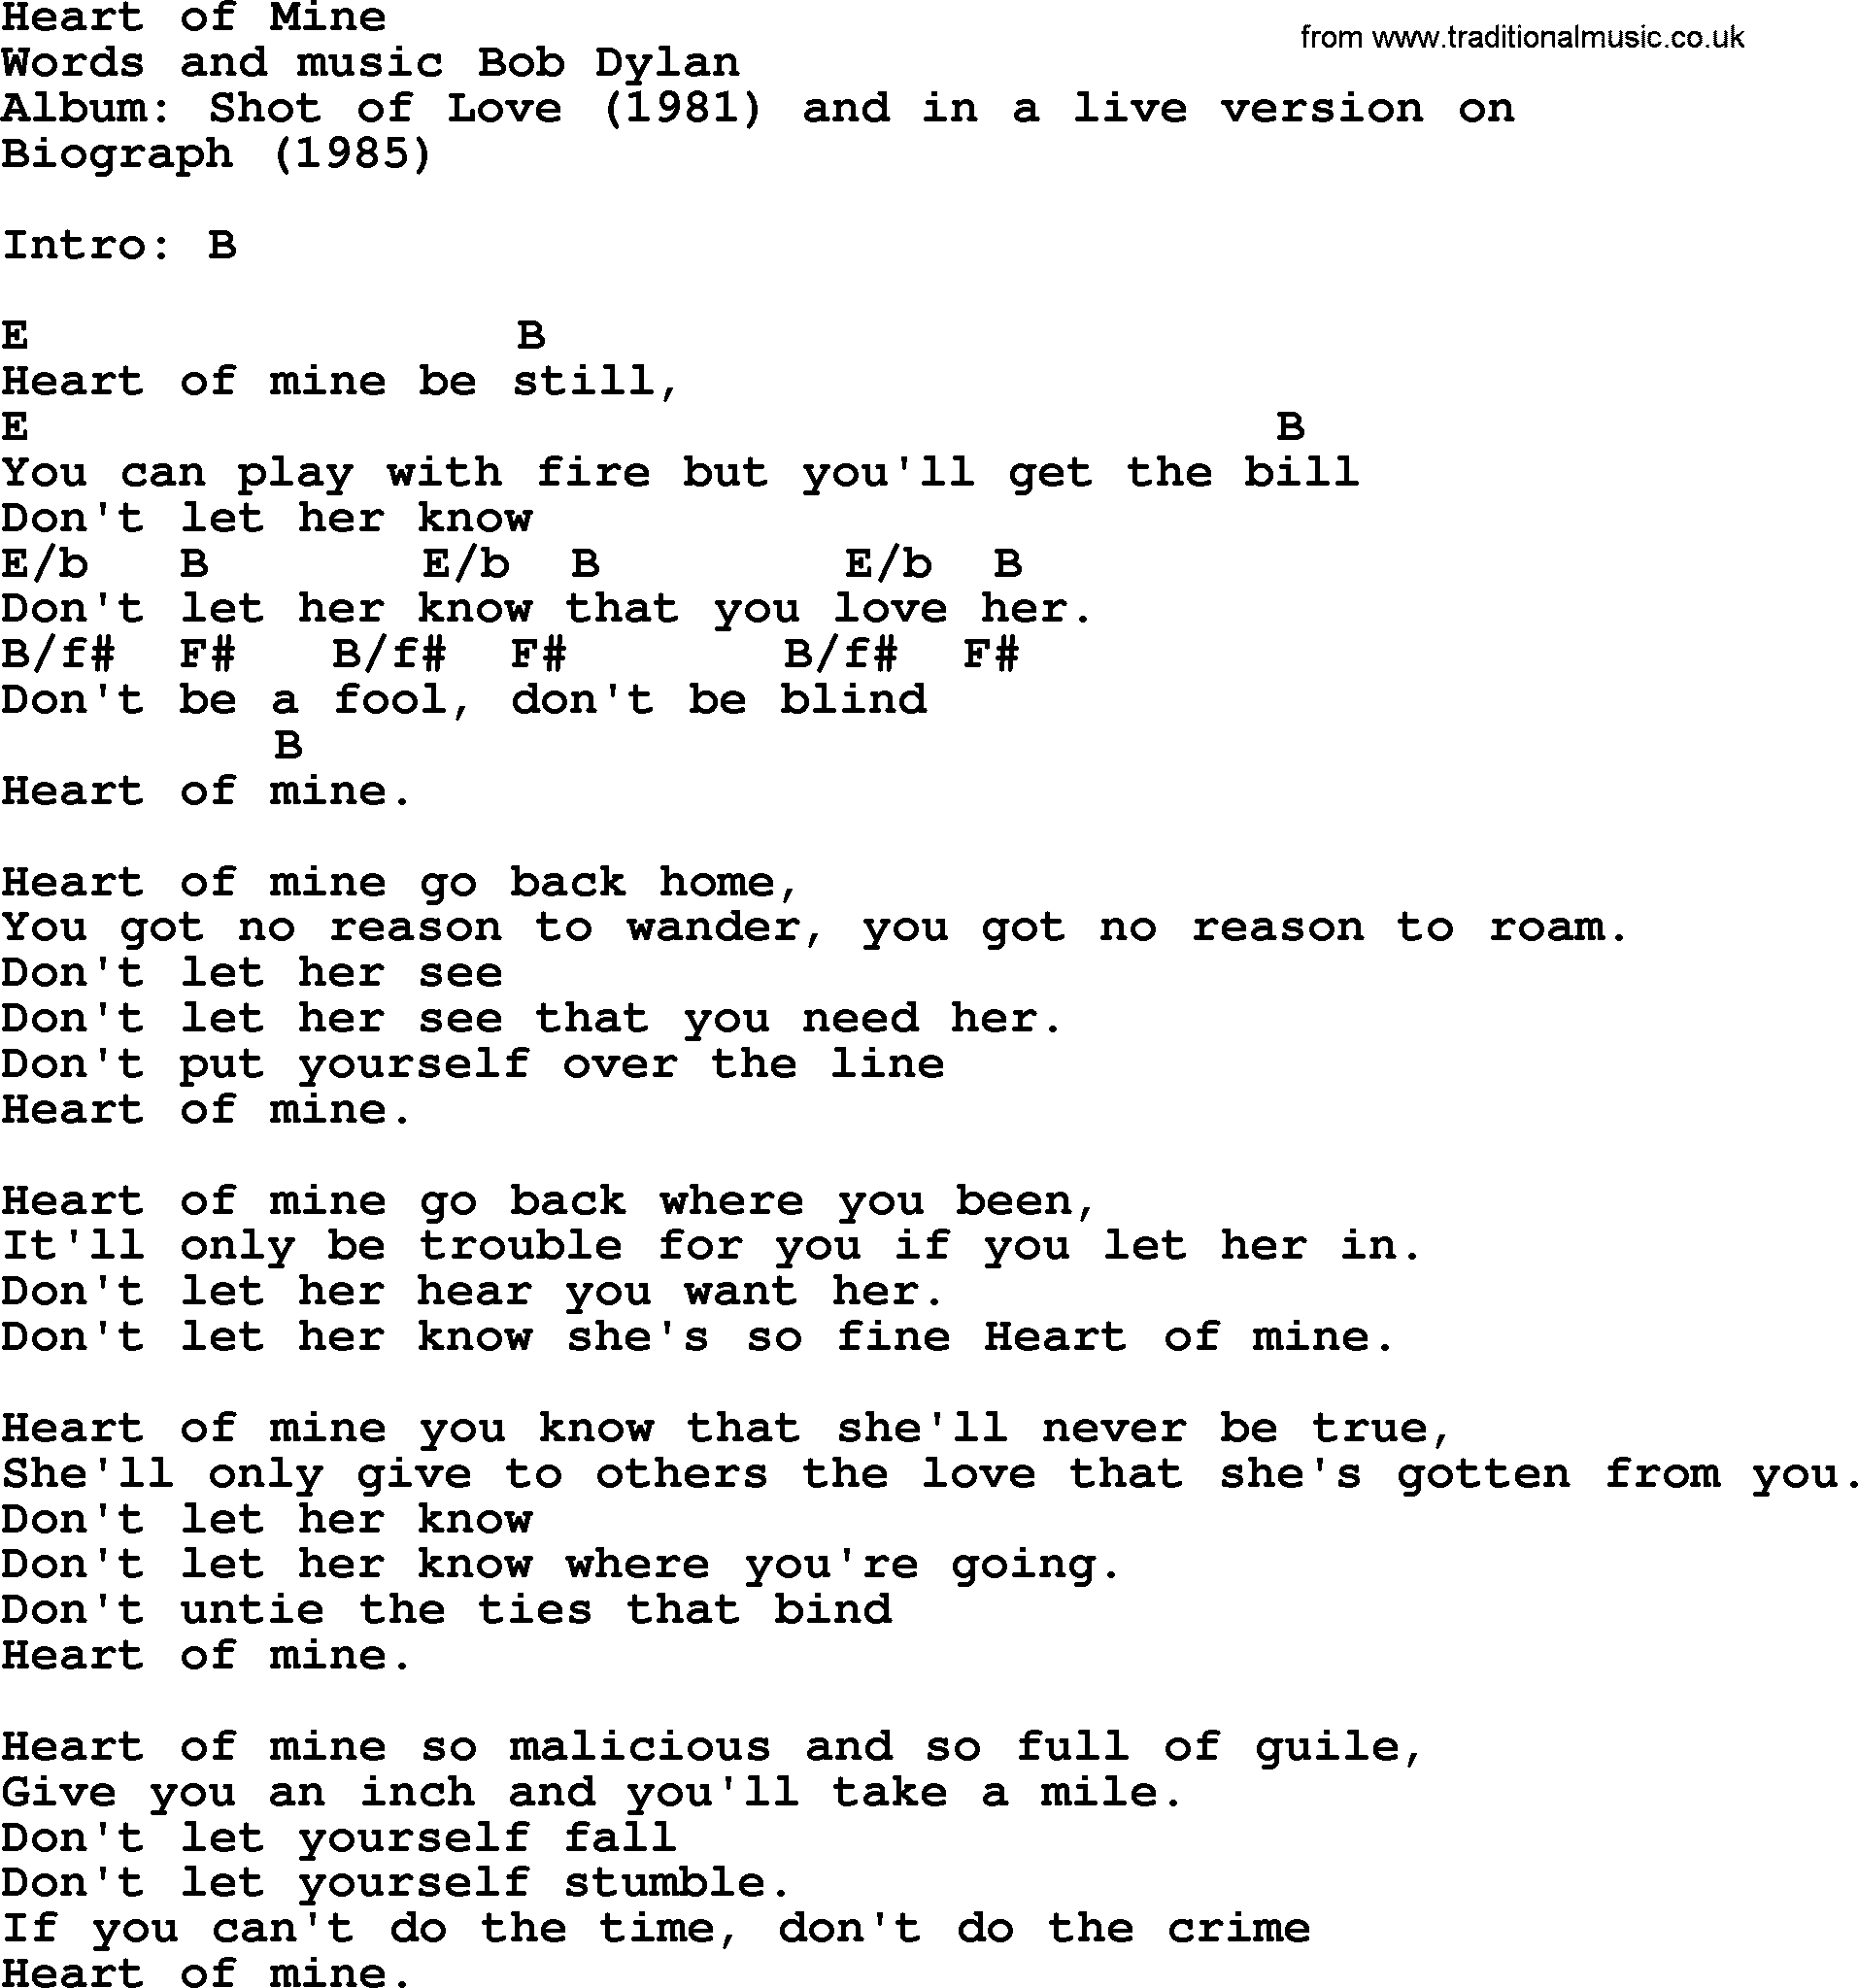 Bob Dylan song, lyrics with chords - Heart of Mine